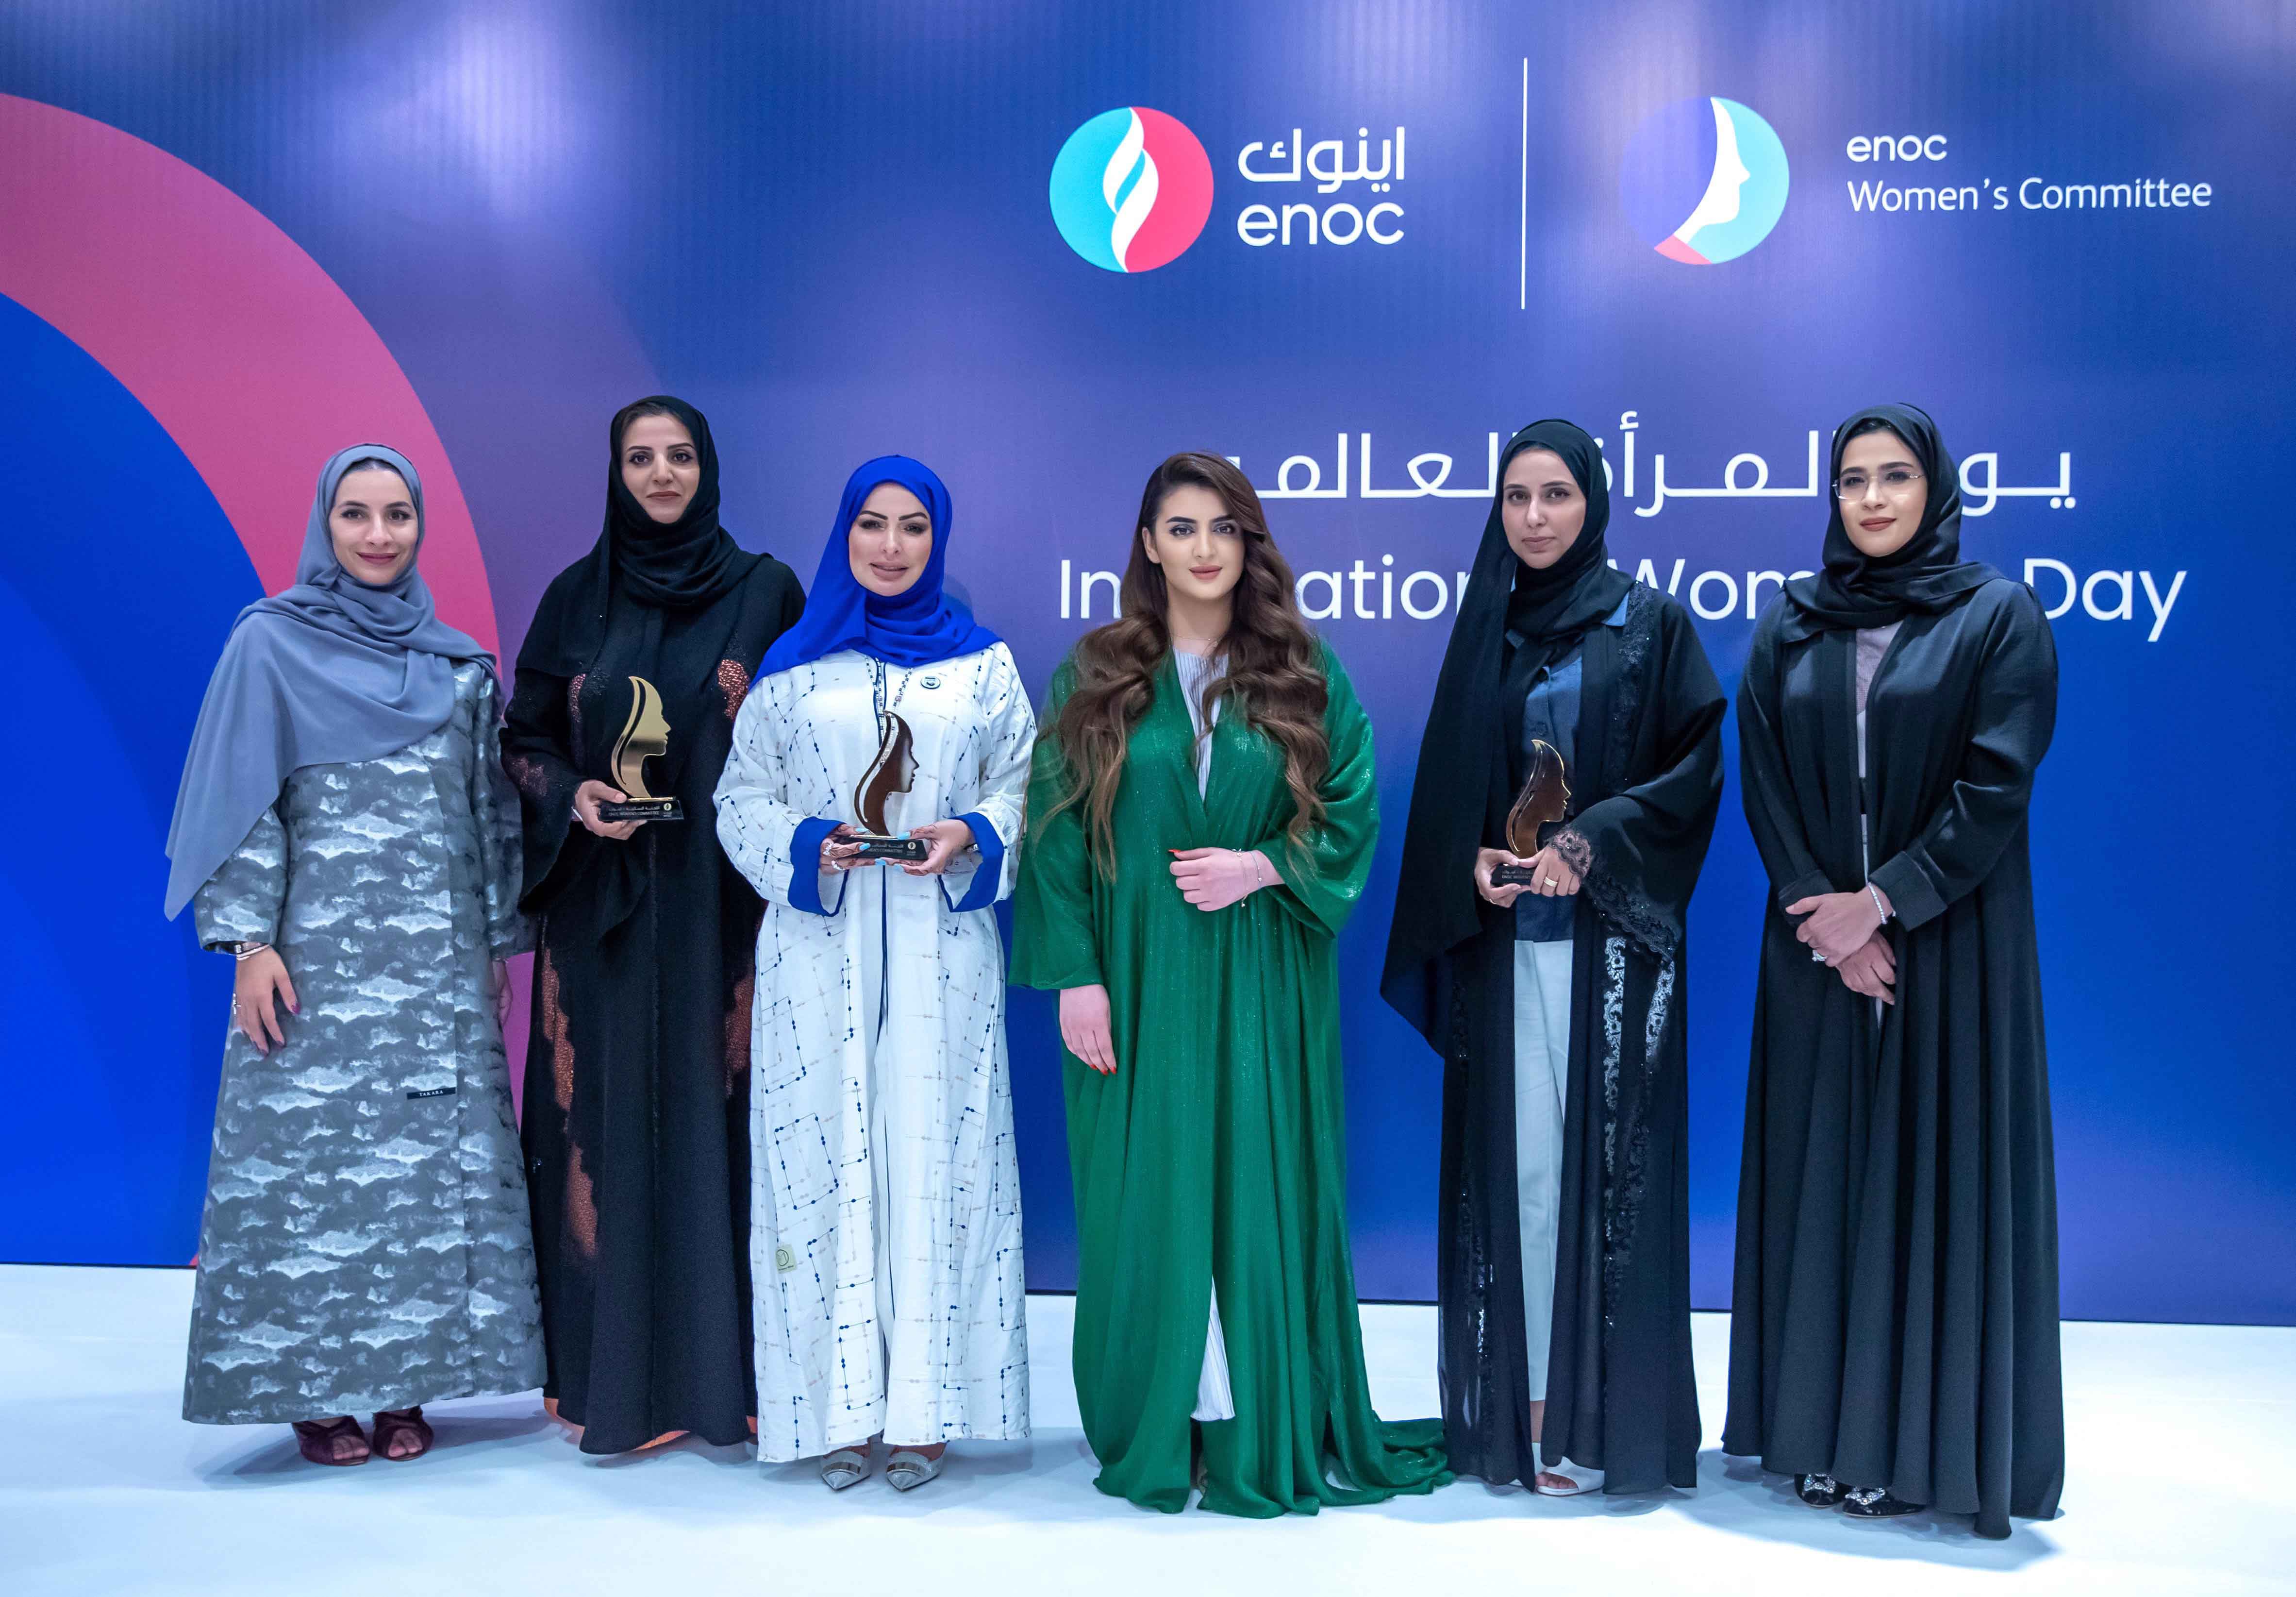 ENOC Group recognises women’s contributions  in the workplace in presence of  HH Sheikha Mahra Al Maktoum